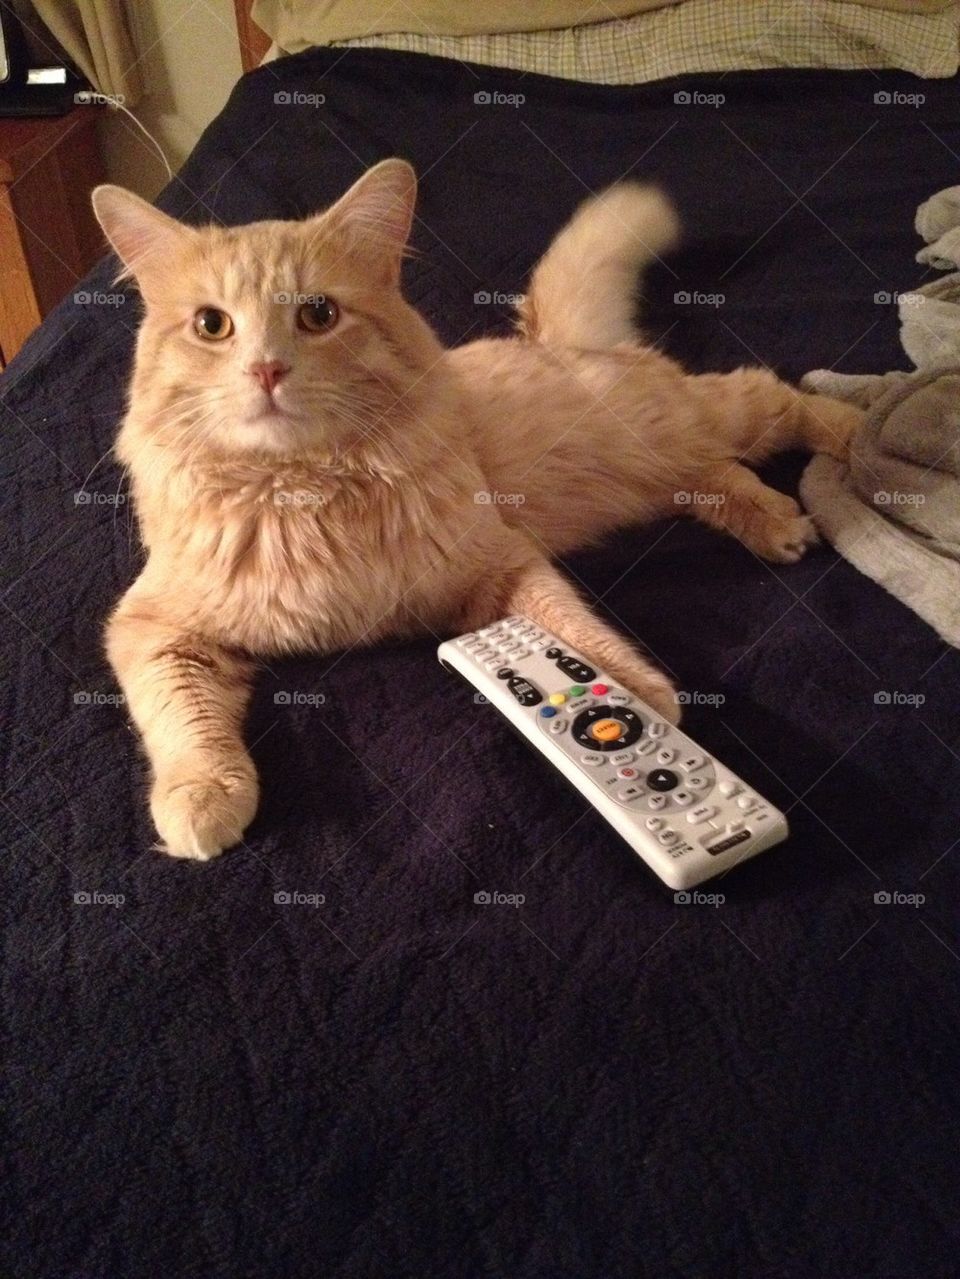 Purrl with the remote